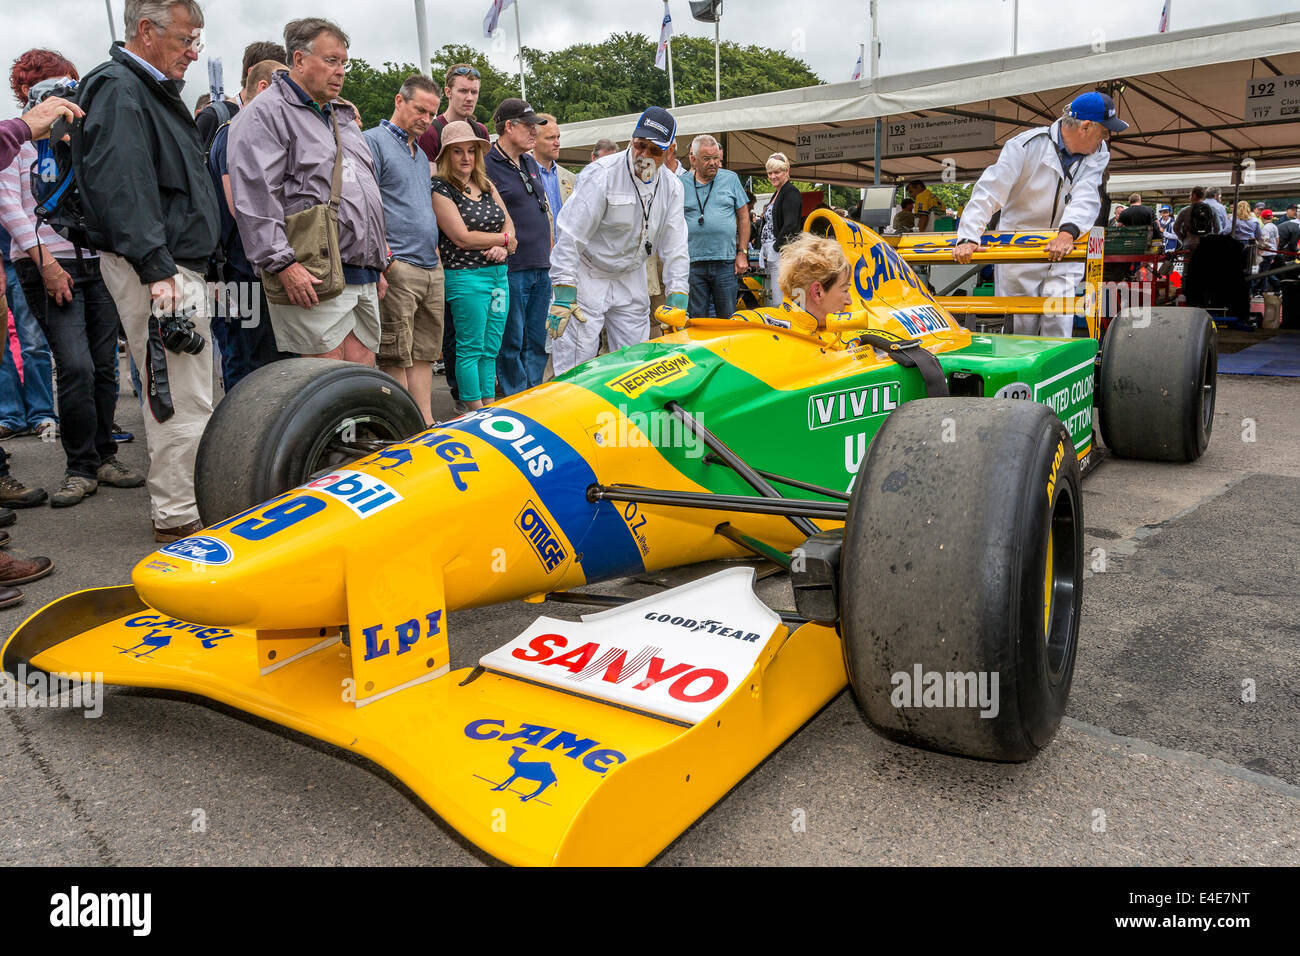 1992 Benetton-Ford B192 in the paddock with driver Lorina McLaughlin. 2014 Goodwood Festival of Speed, Sussex, UK. Stock Photo